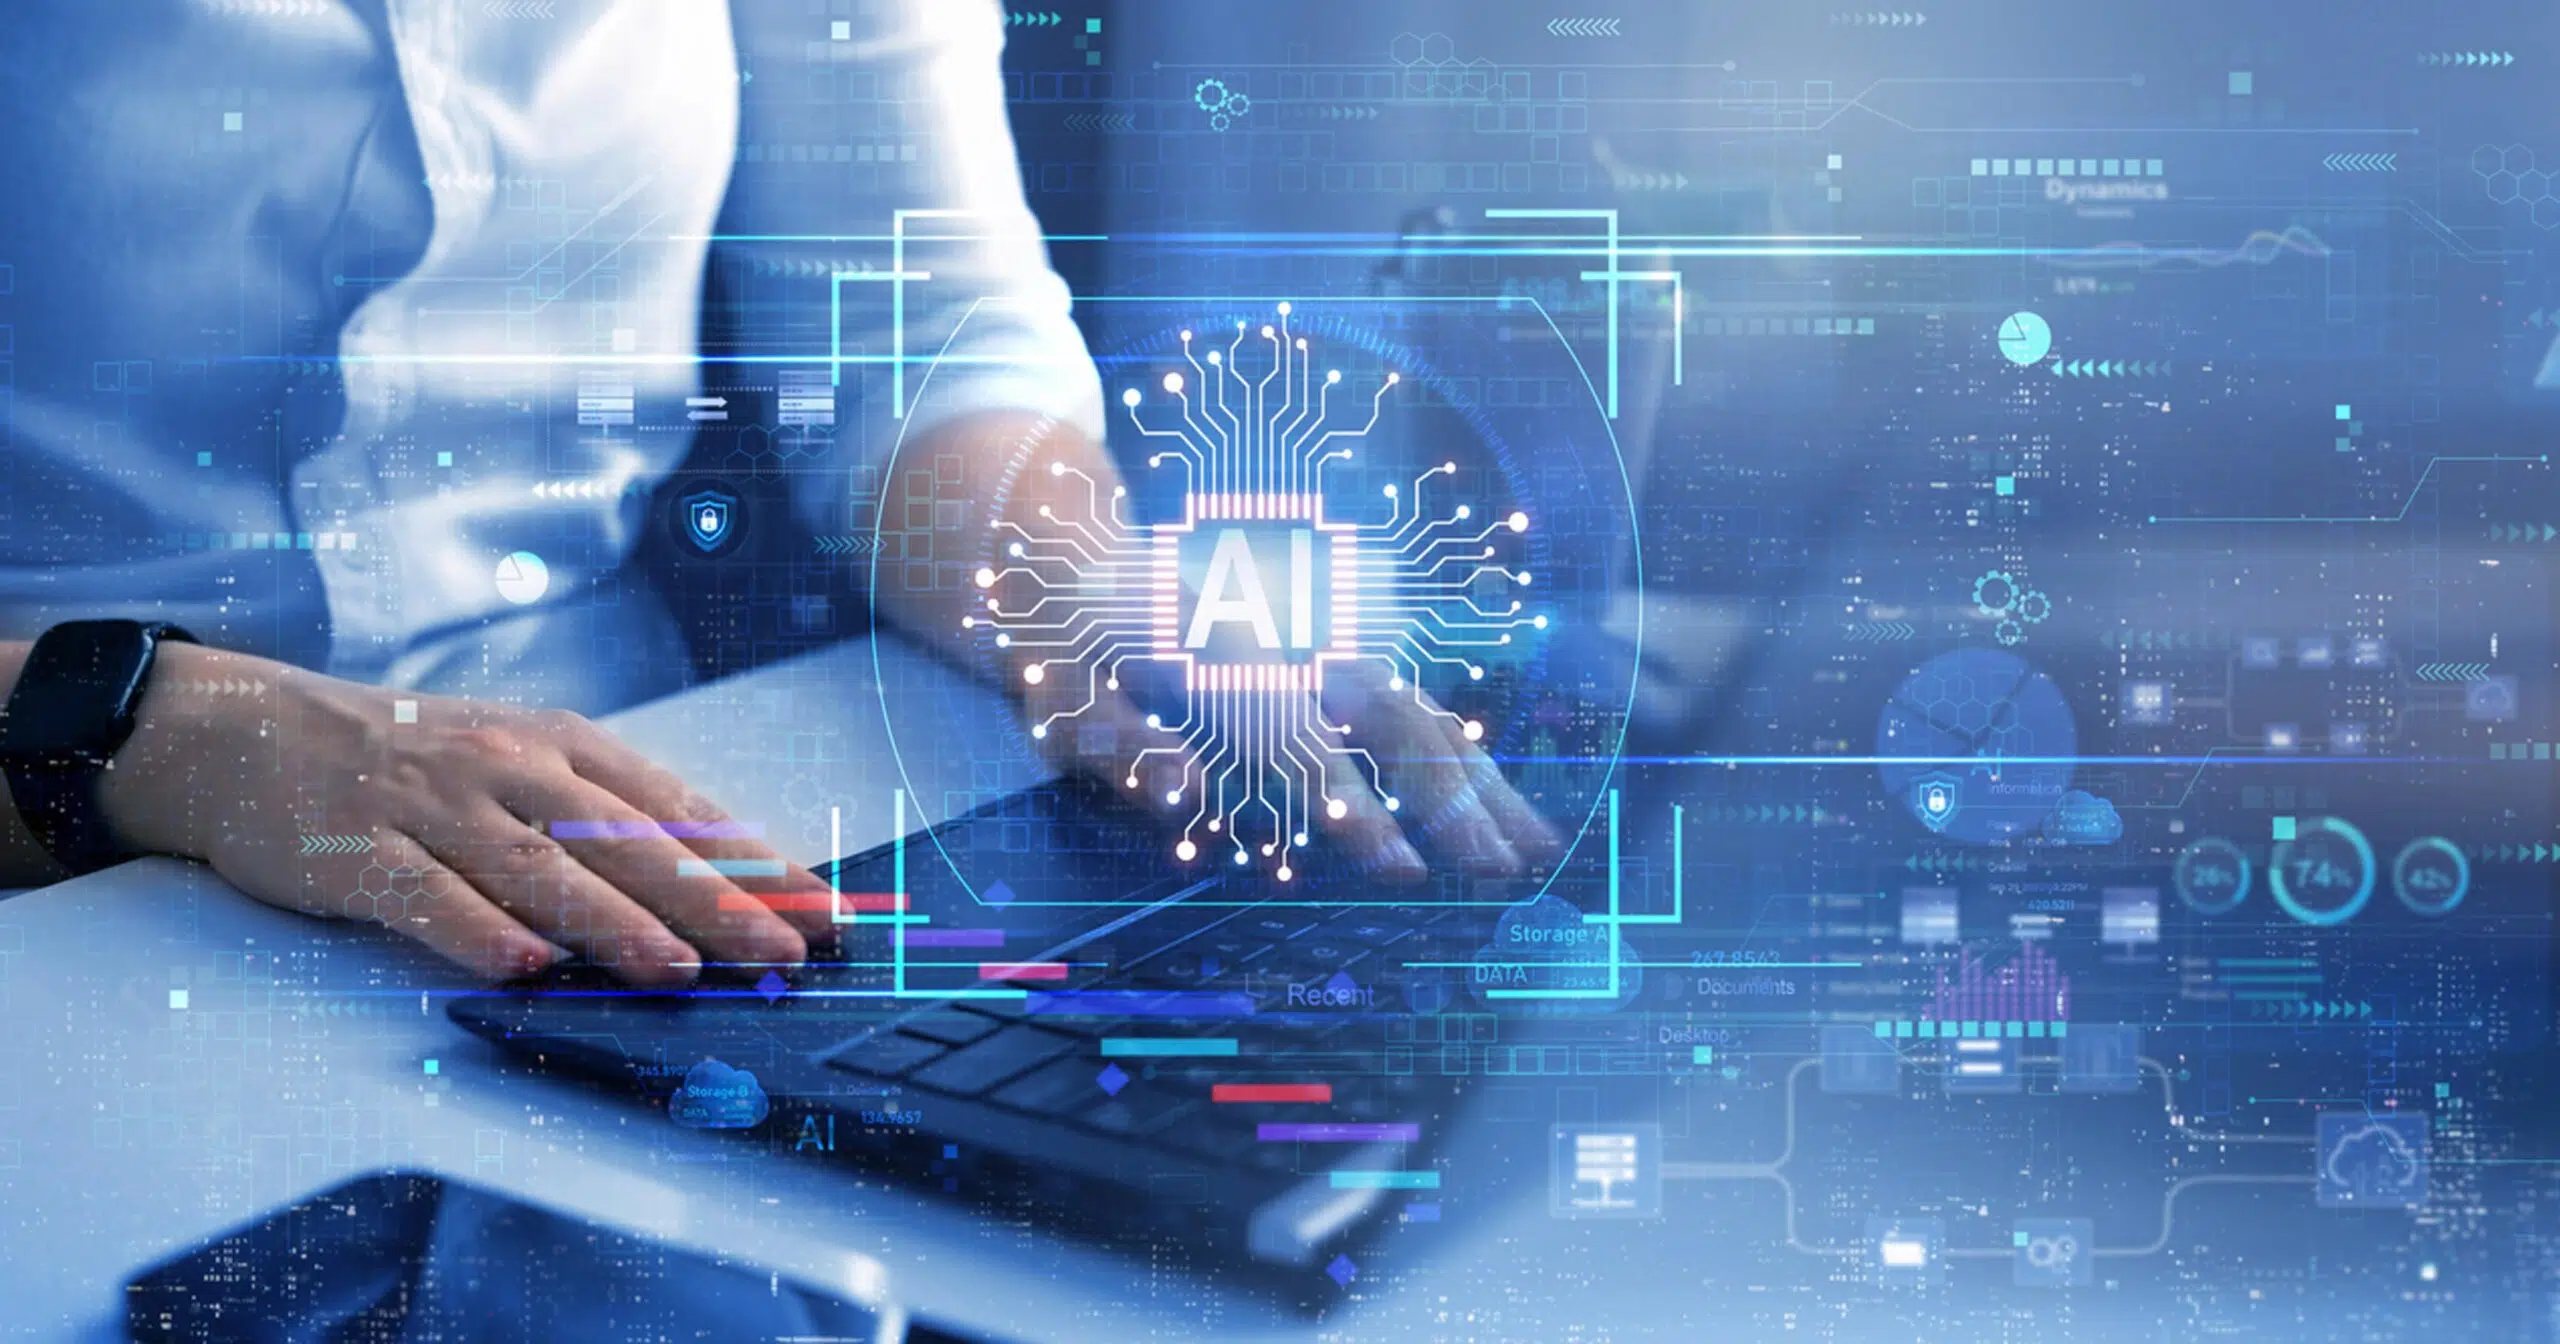 Using AI for virtual healthcare assistant